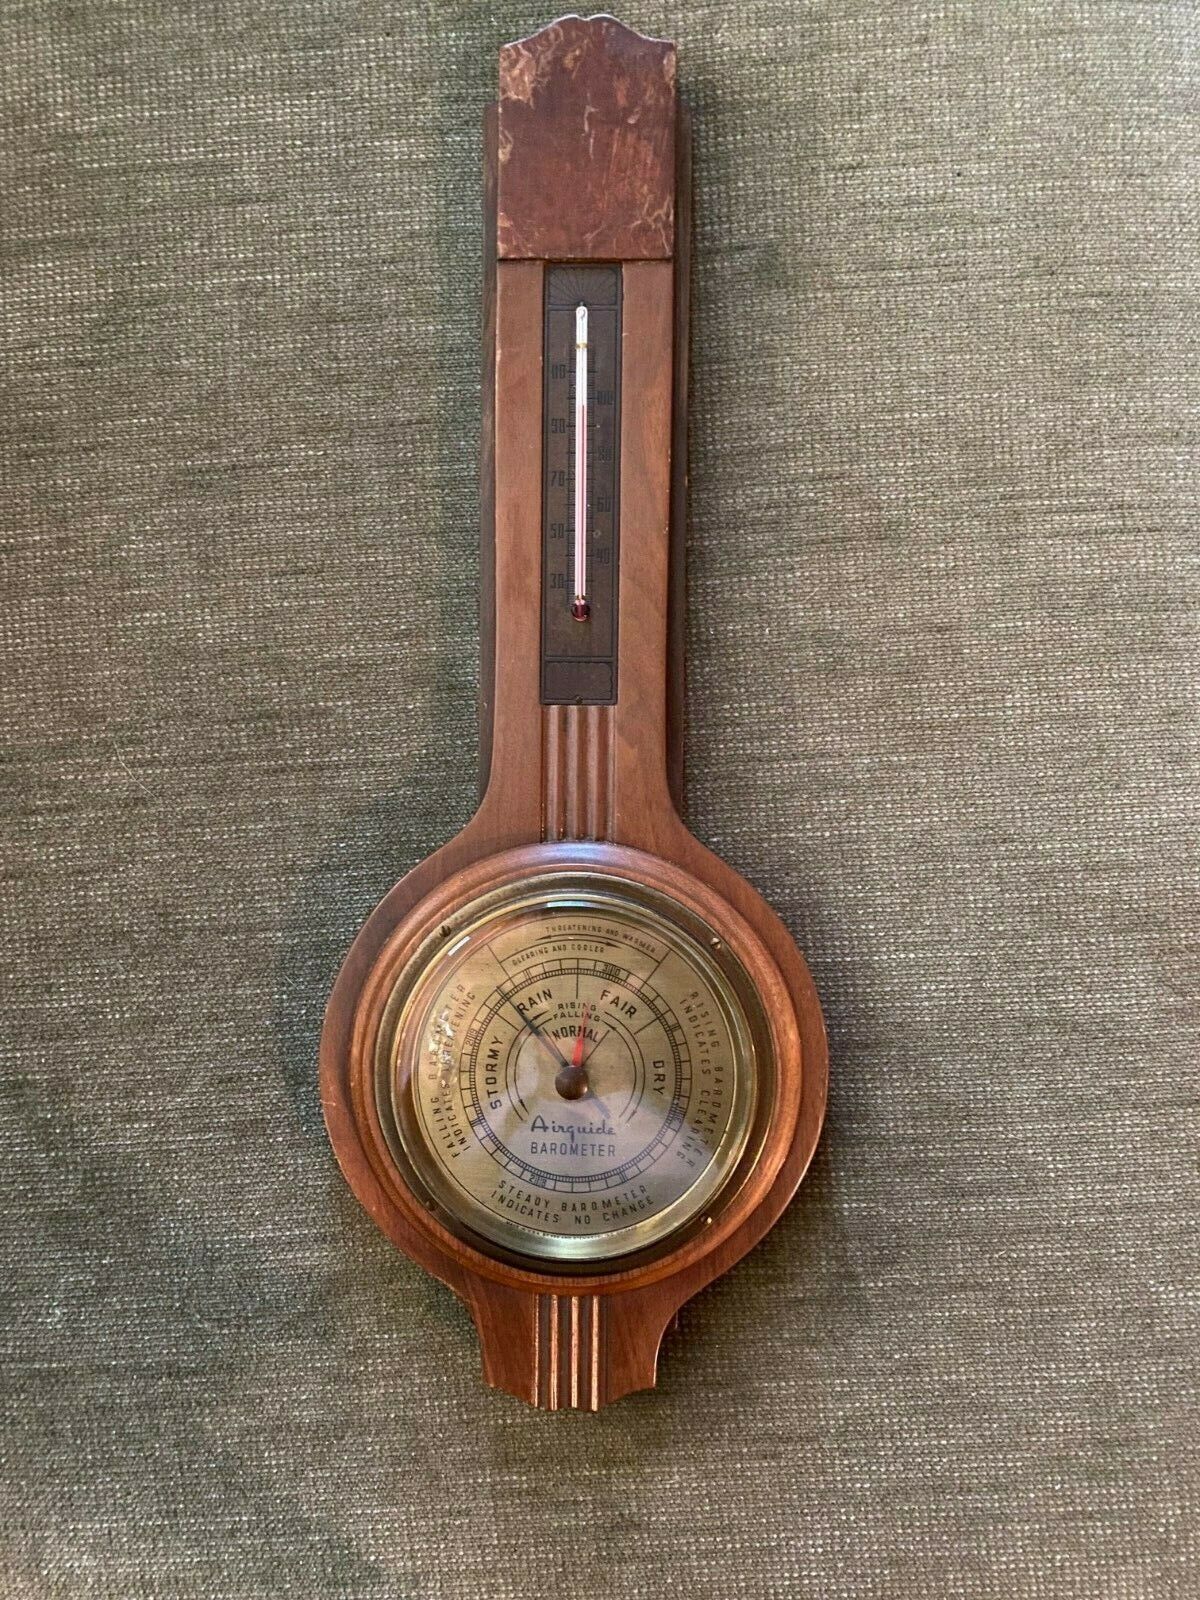 VINTAGE AIRGUIDE BANJO STYLE - TEMPERATURE & BAROMETER - 18 IN - WOOD WALL-MOUNT